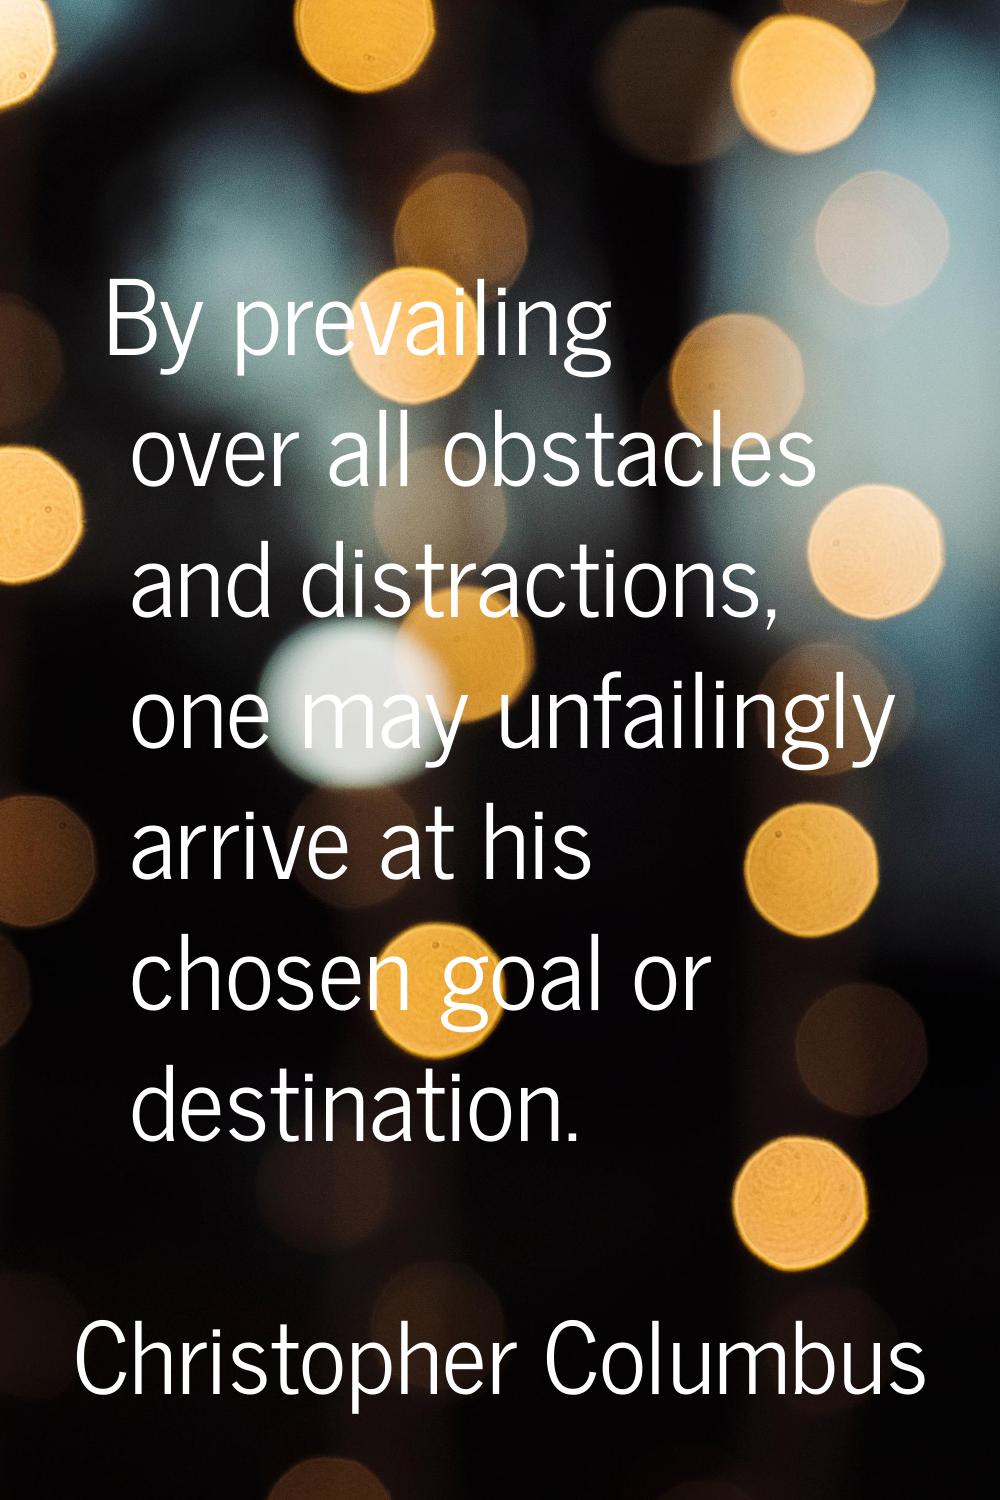 By prevailing over all obstacles and distractions, one may unfailingly arrive at his chosen goal or